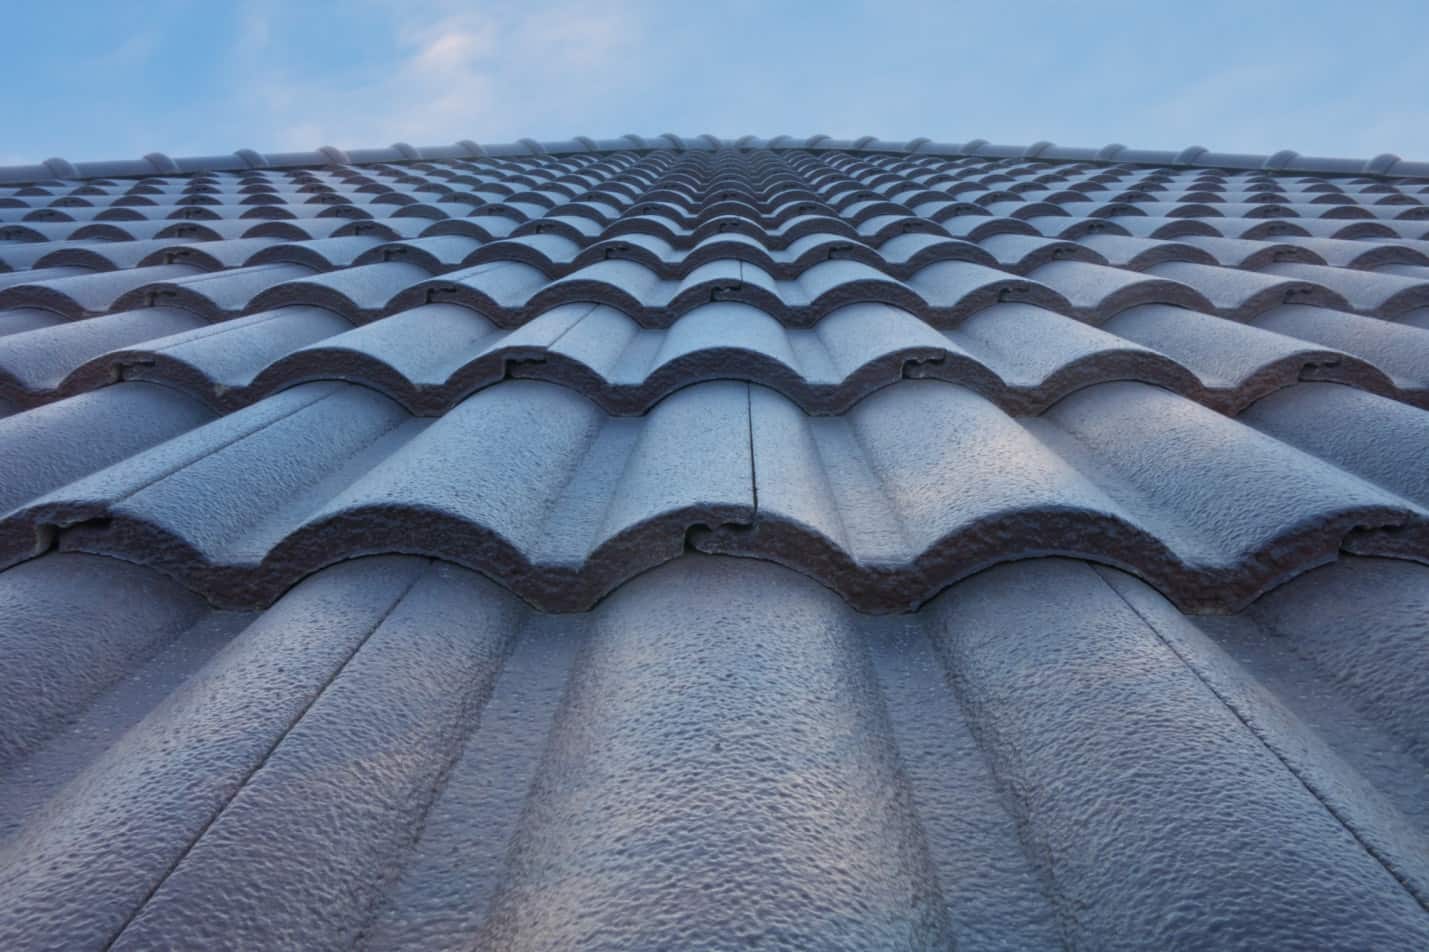 The Different Types of Roofing Materials: A Detailed Guide. Asphalt shingles at the top of the house